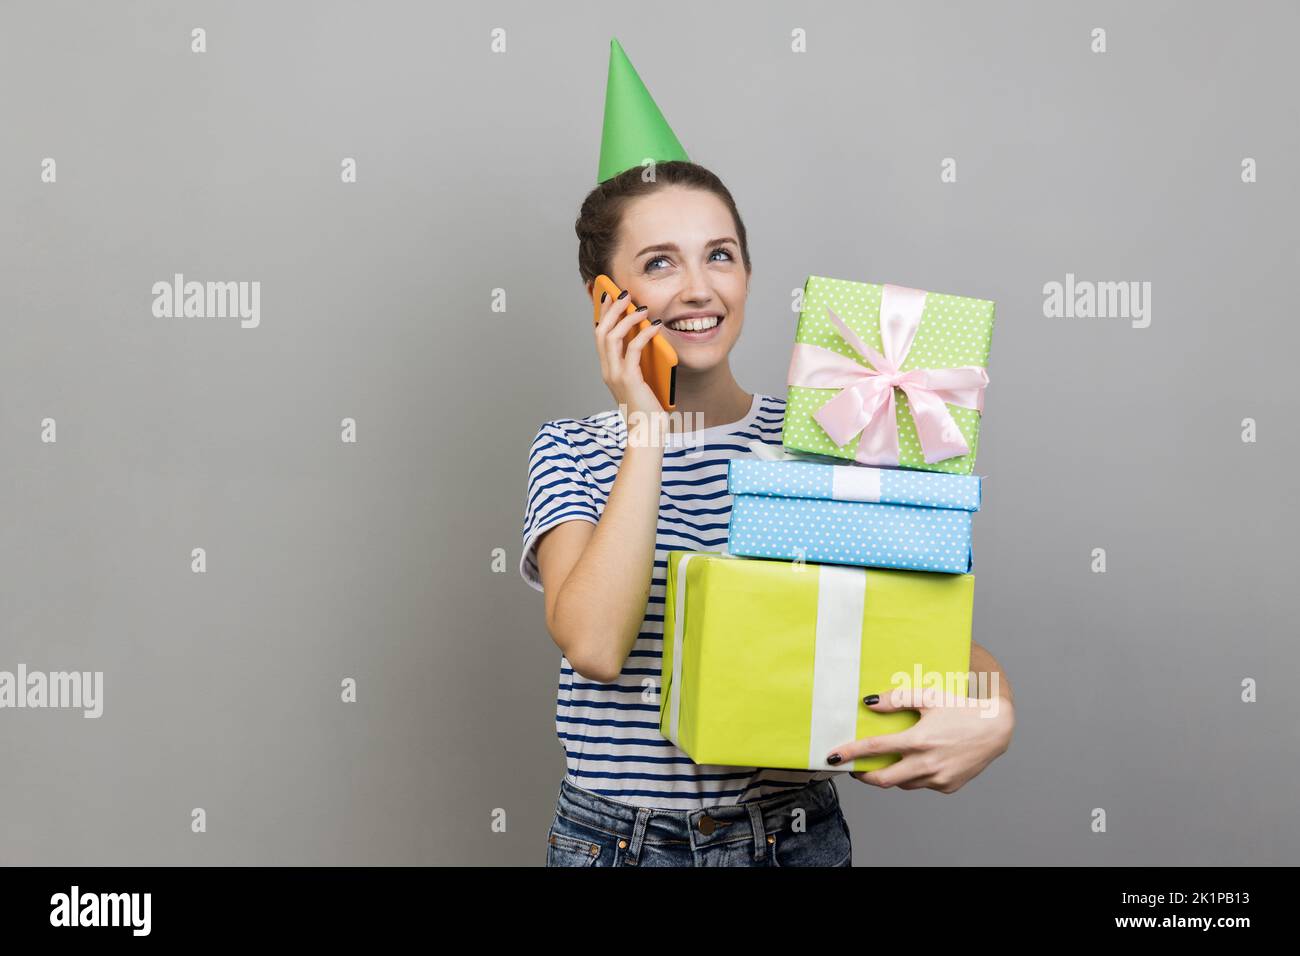 Portrait of optimistic woman wearing striped T-shirt and party cone, holding stack of gift boxes and talking phone, boasting her presents. Indoor studio shot isolated on gray background. Stock Photo